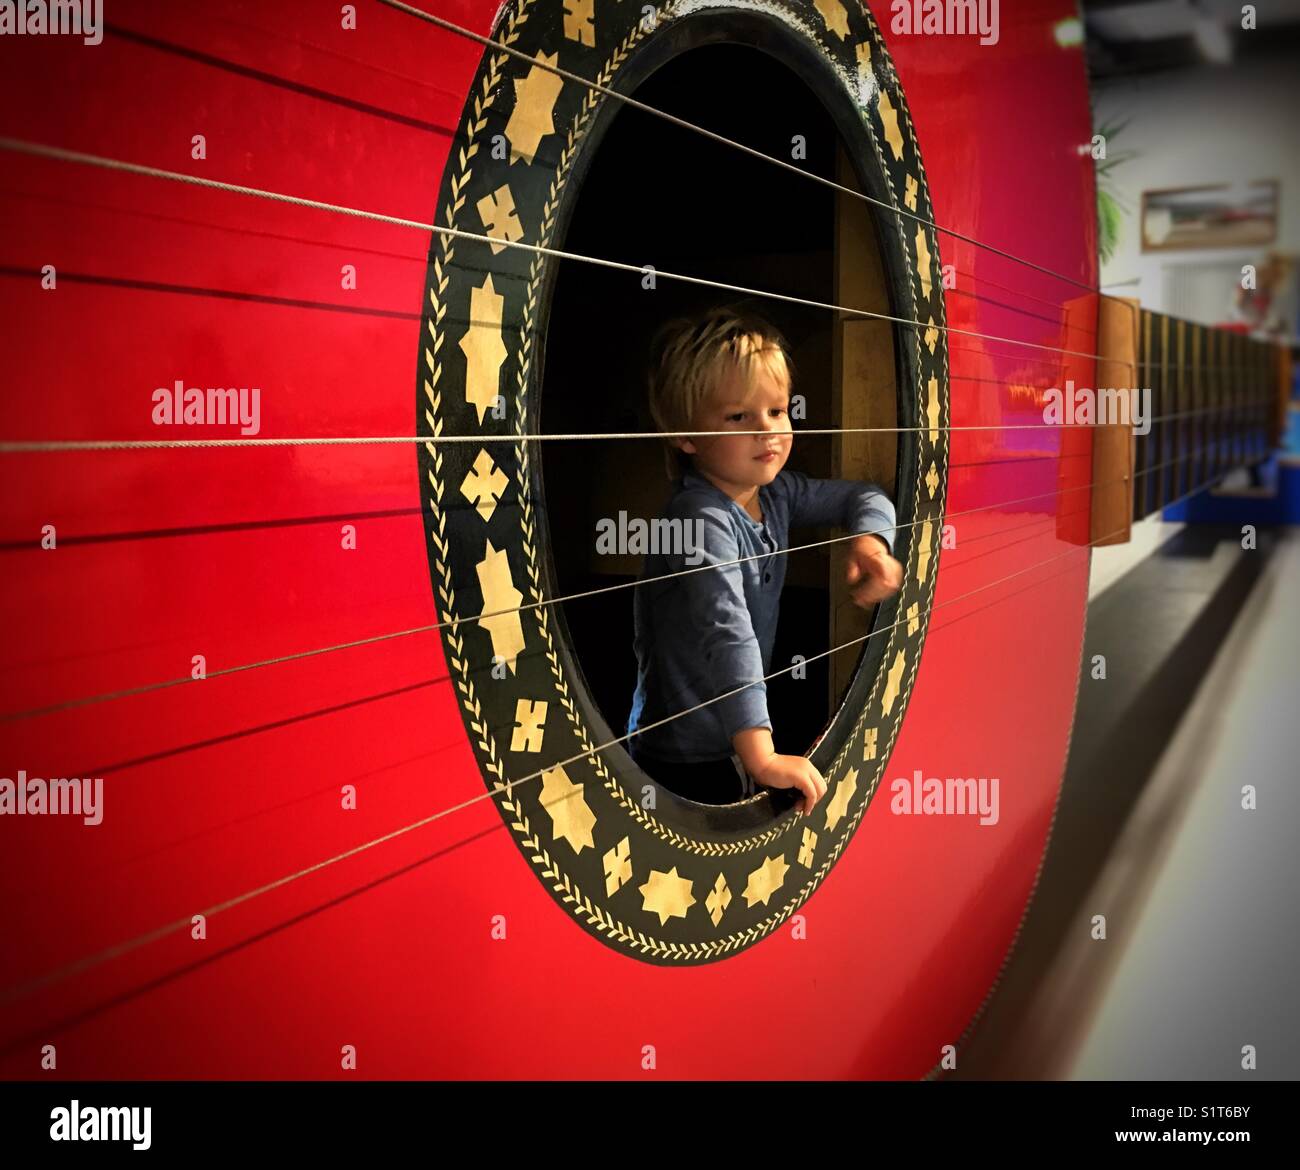 Child exploring the giant guitar in Deutsches Museum, Munich. Giant guitar made by ‘The Stradivarium‘: Anthony Dale, Chris Challen, Lucy Coad, Jem Le Livre, Ian Blythe & Julian Thompson. Stock Photo